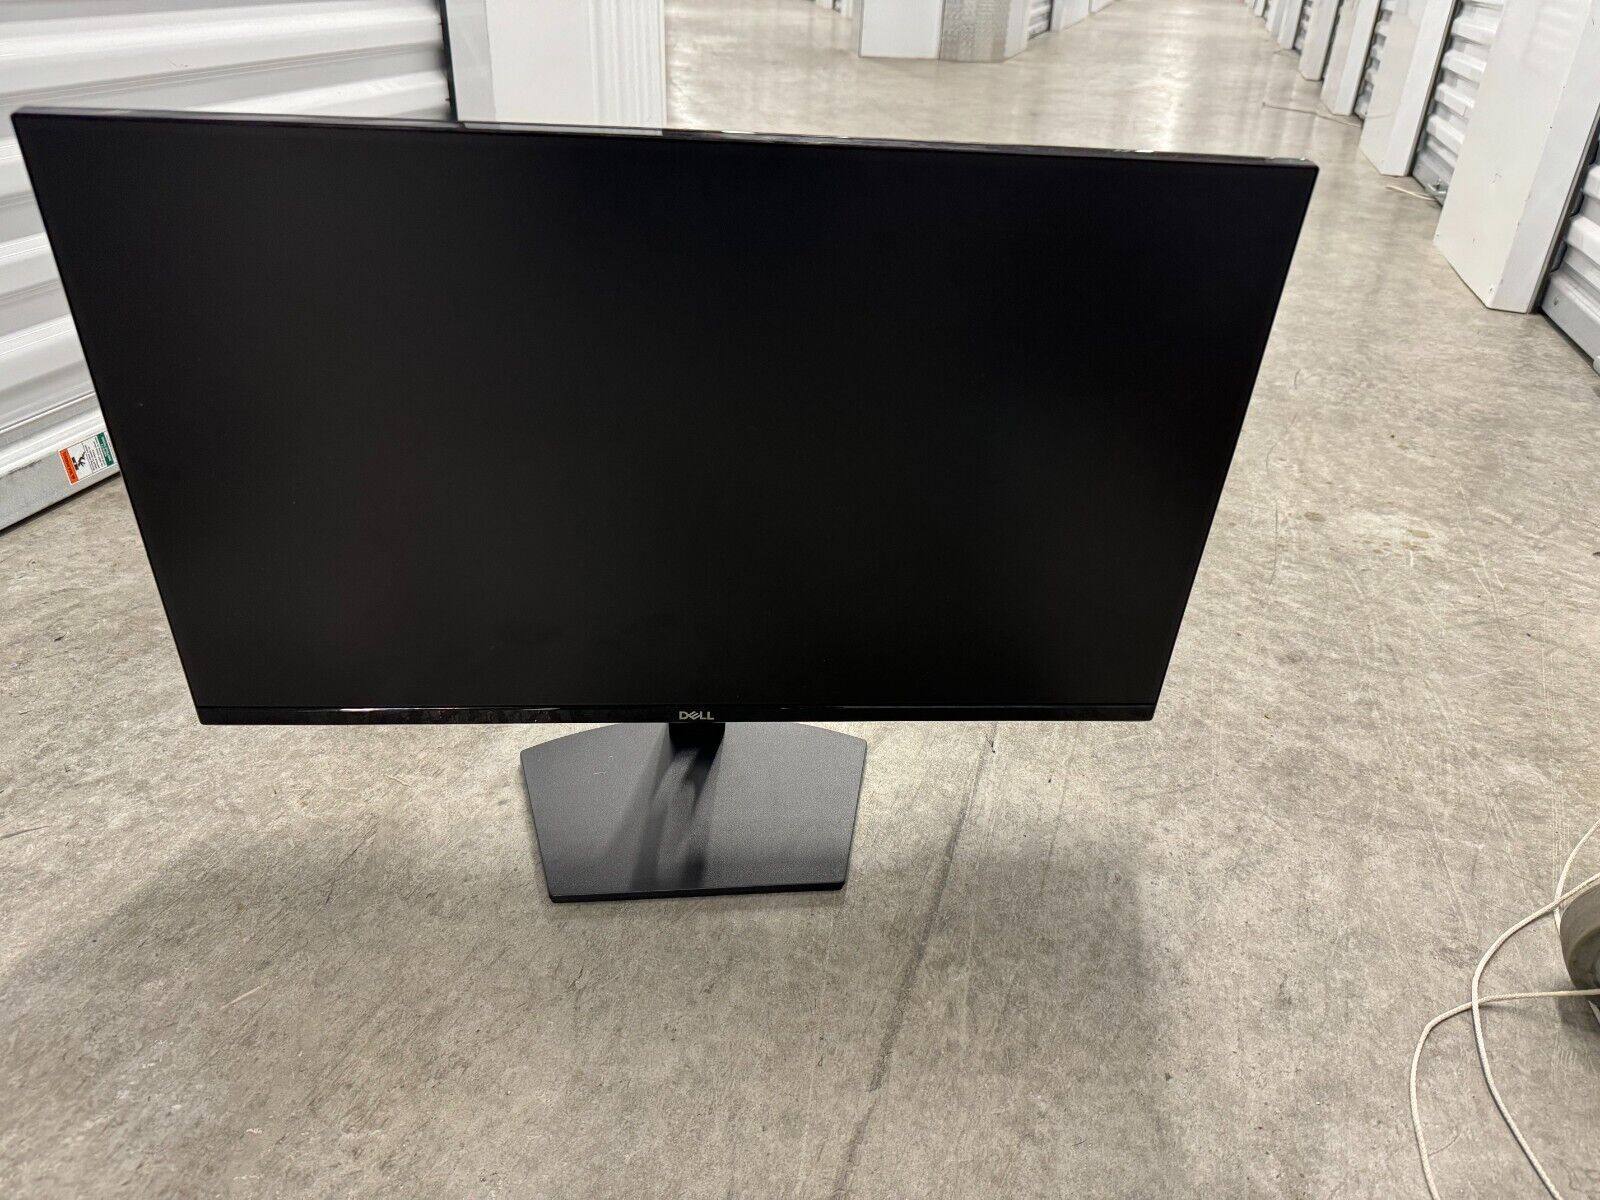 Dell SE2719HR 27 inch Widescreen IPS LCD Monitor